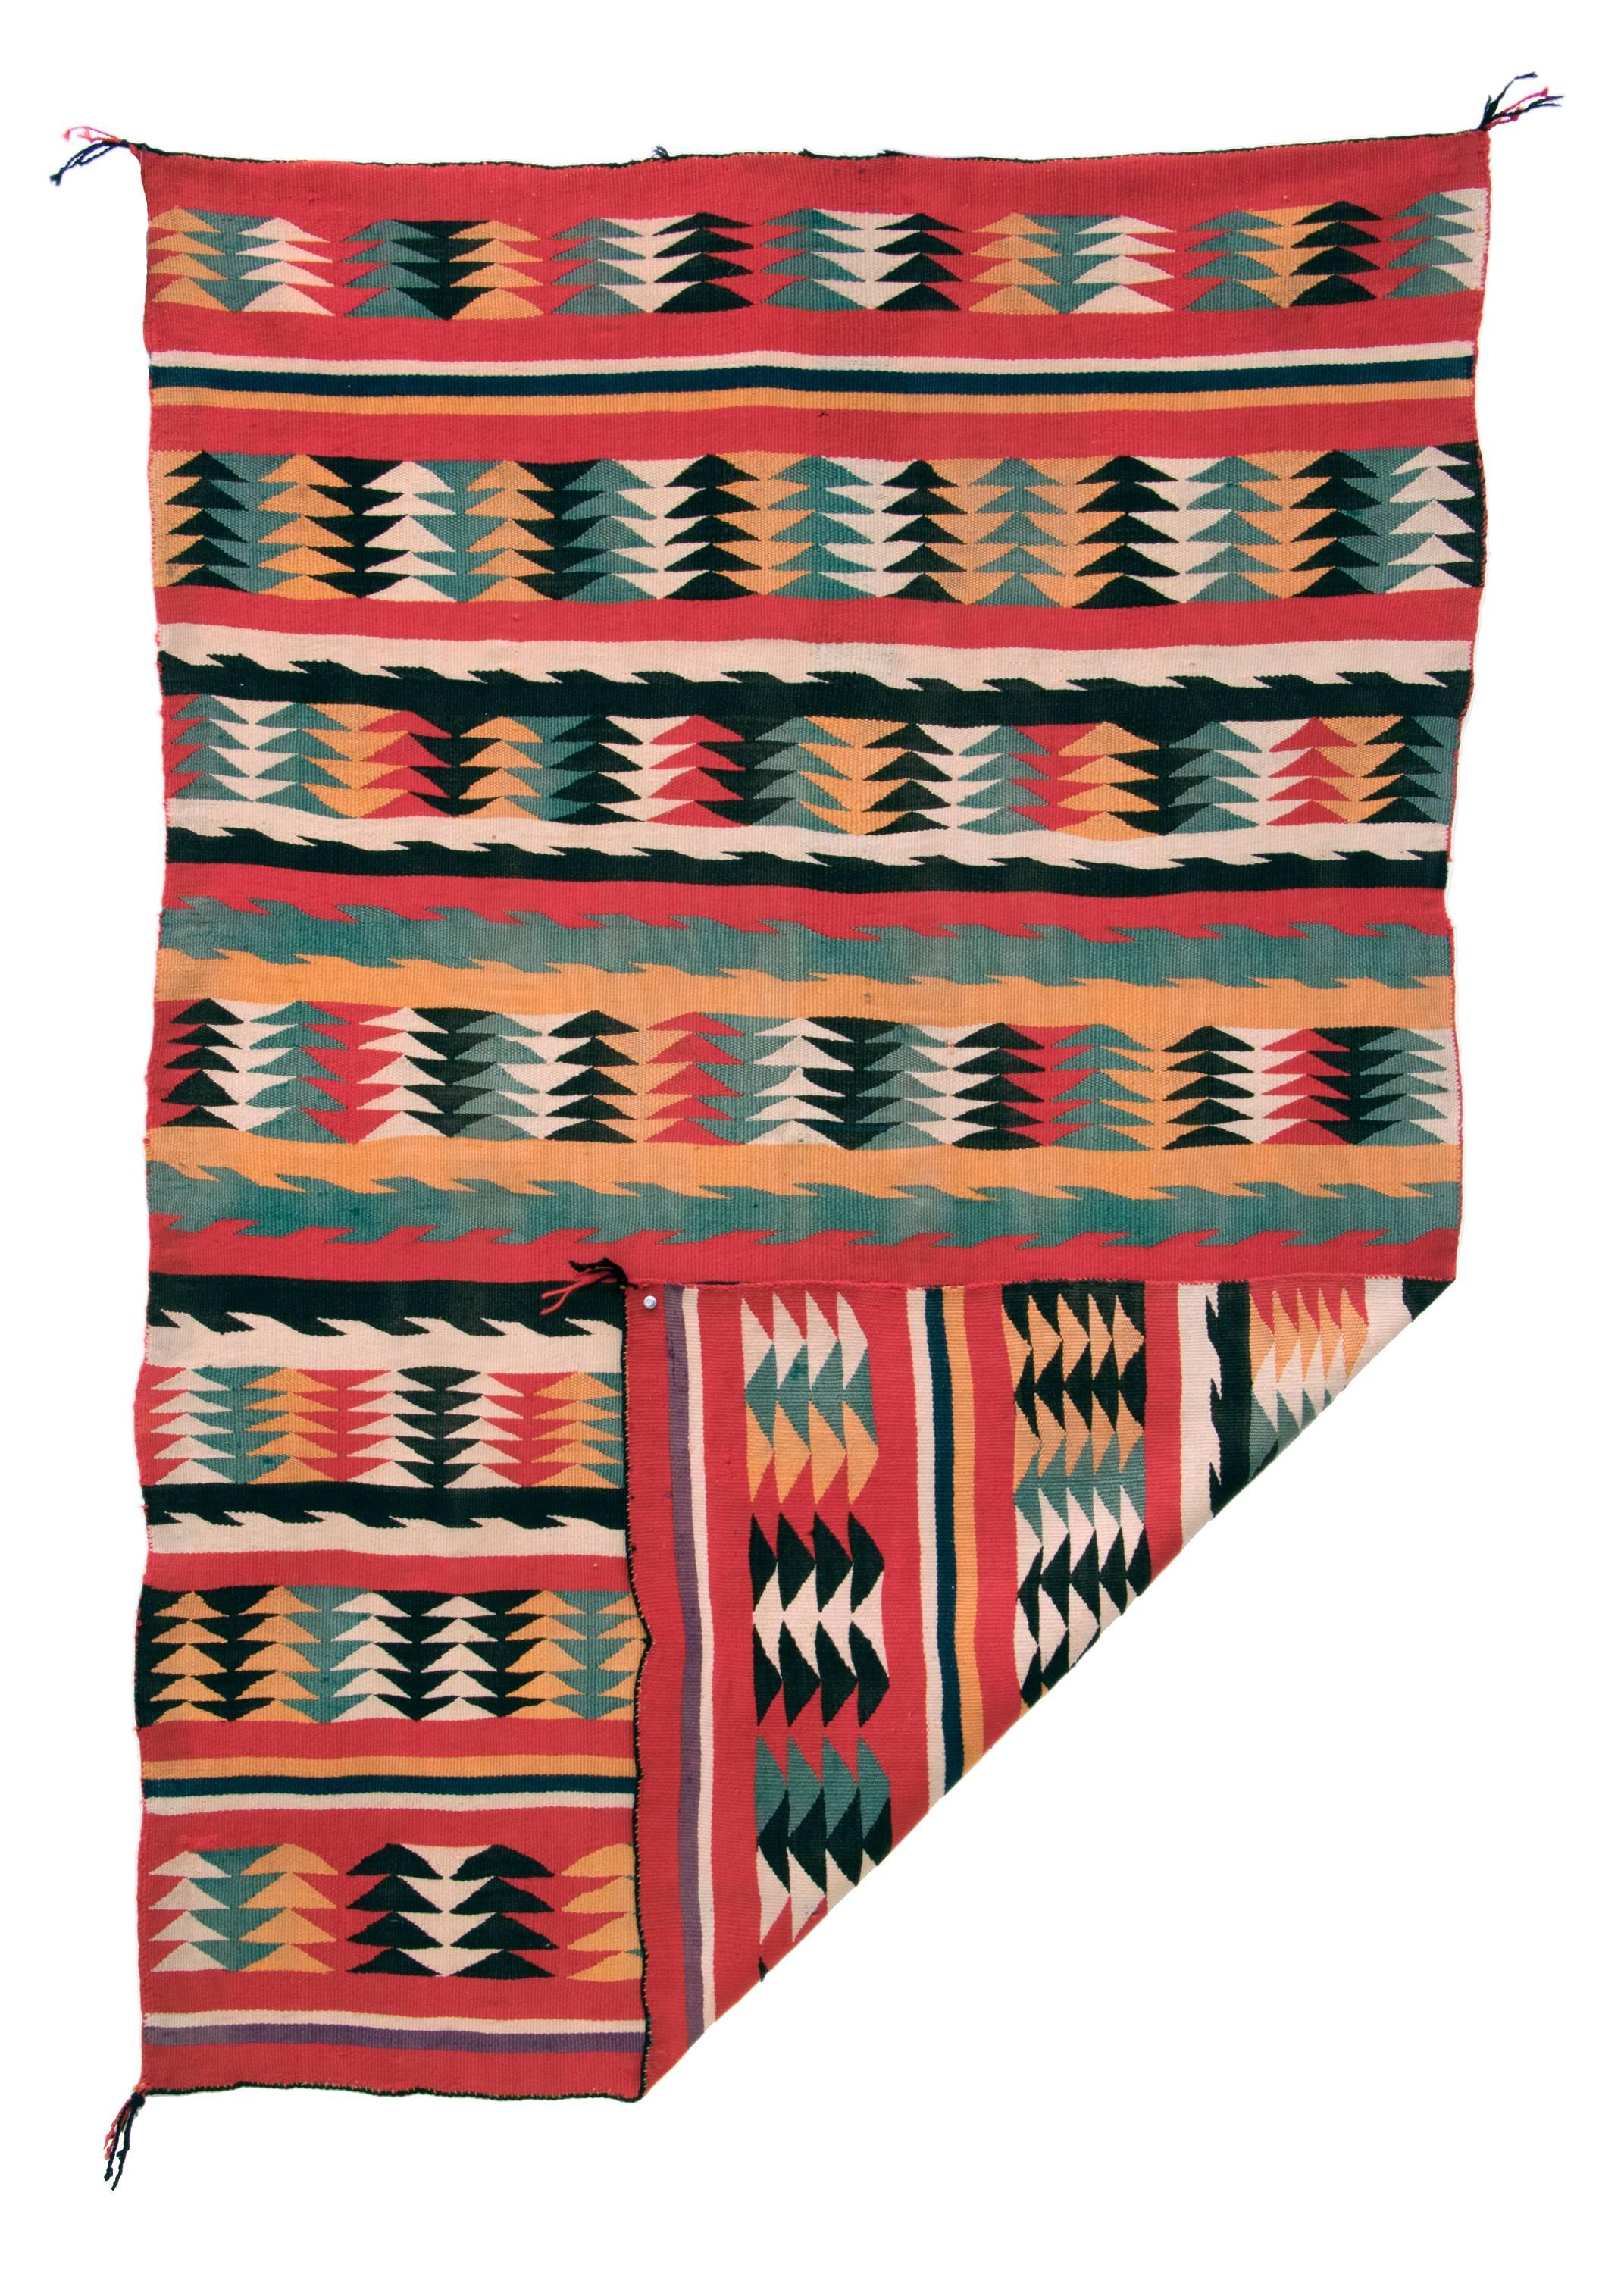 A brightly colored saddle blanket. Masterfully created by a Navajo weaver from Germantown yarns during the late 19th century.

This textile is well suited for use as a wall hanging or as a bed or furniture throw or covering; we do not suggest